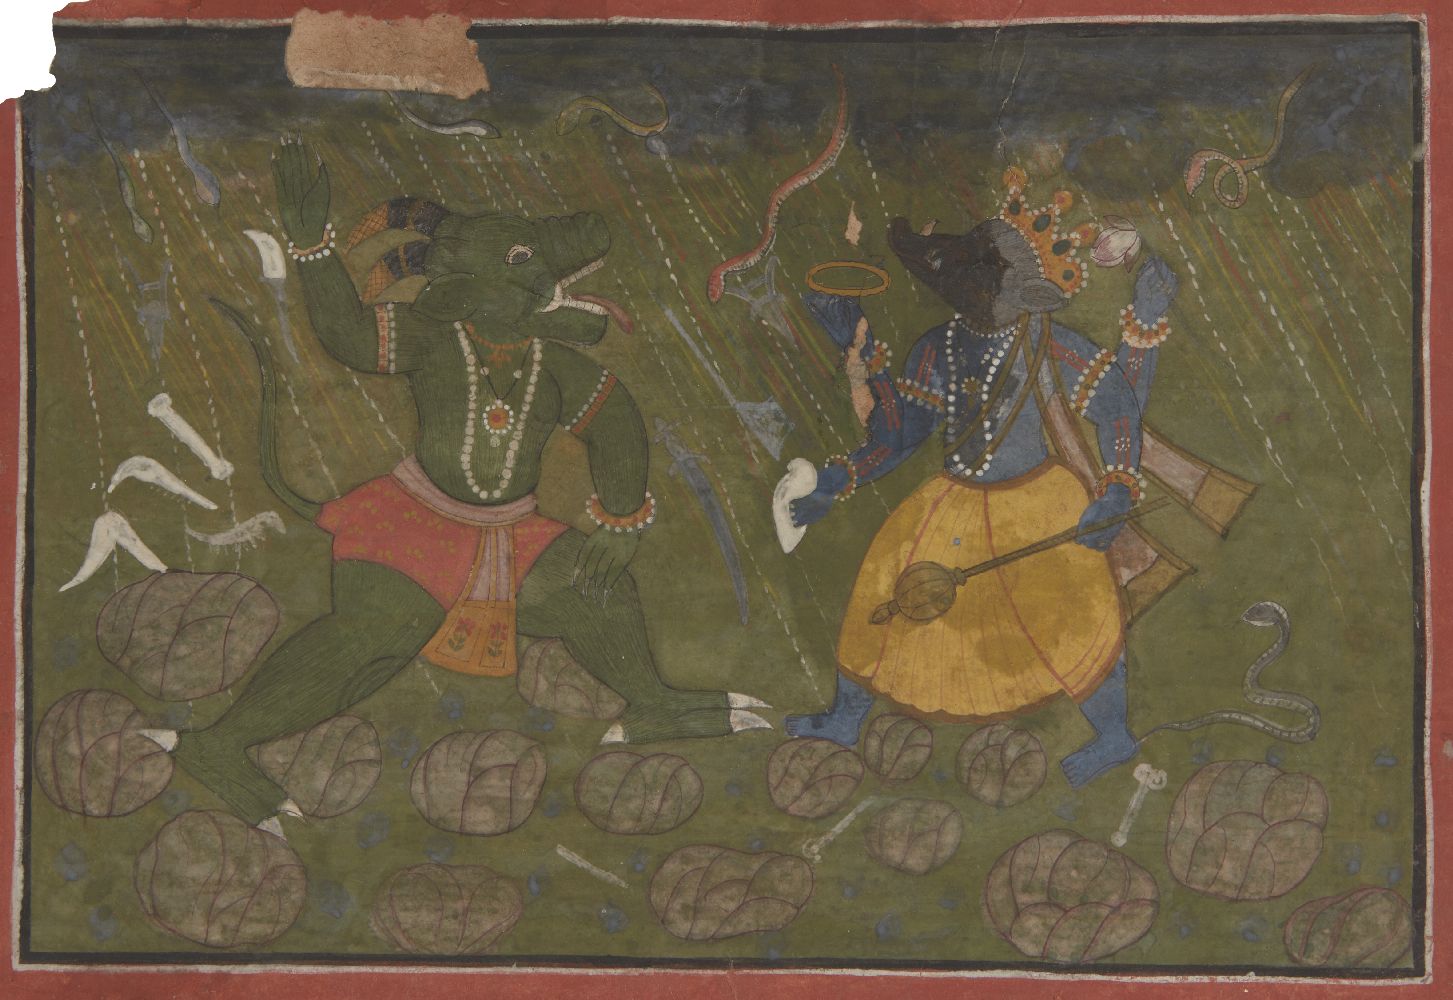 Two demons fighting each other, Rajasthan, India, 19th century, opaque pigments on paper, the demons